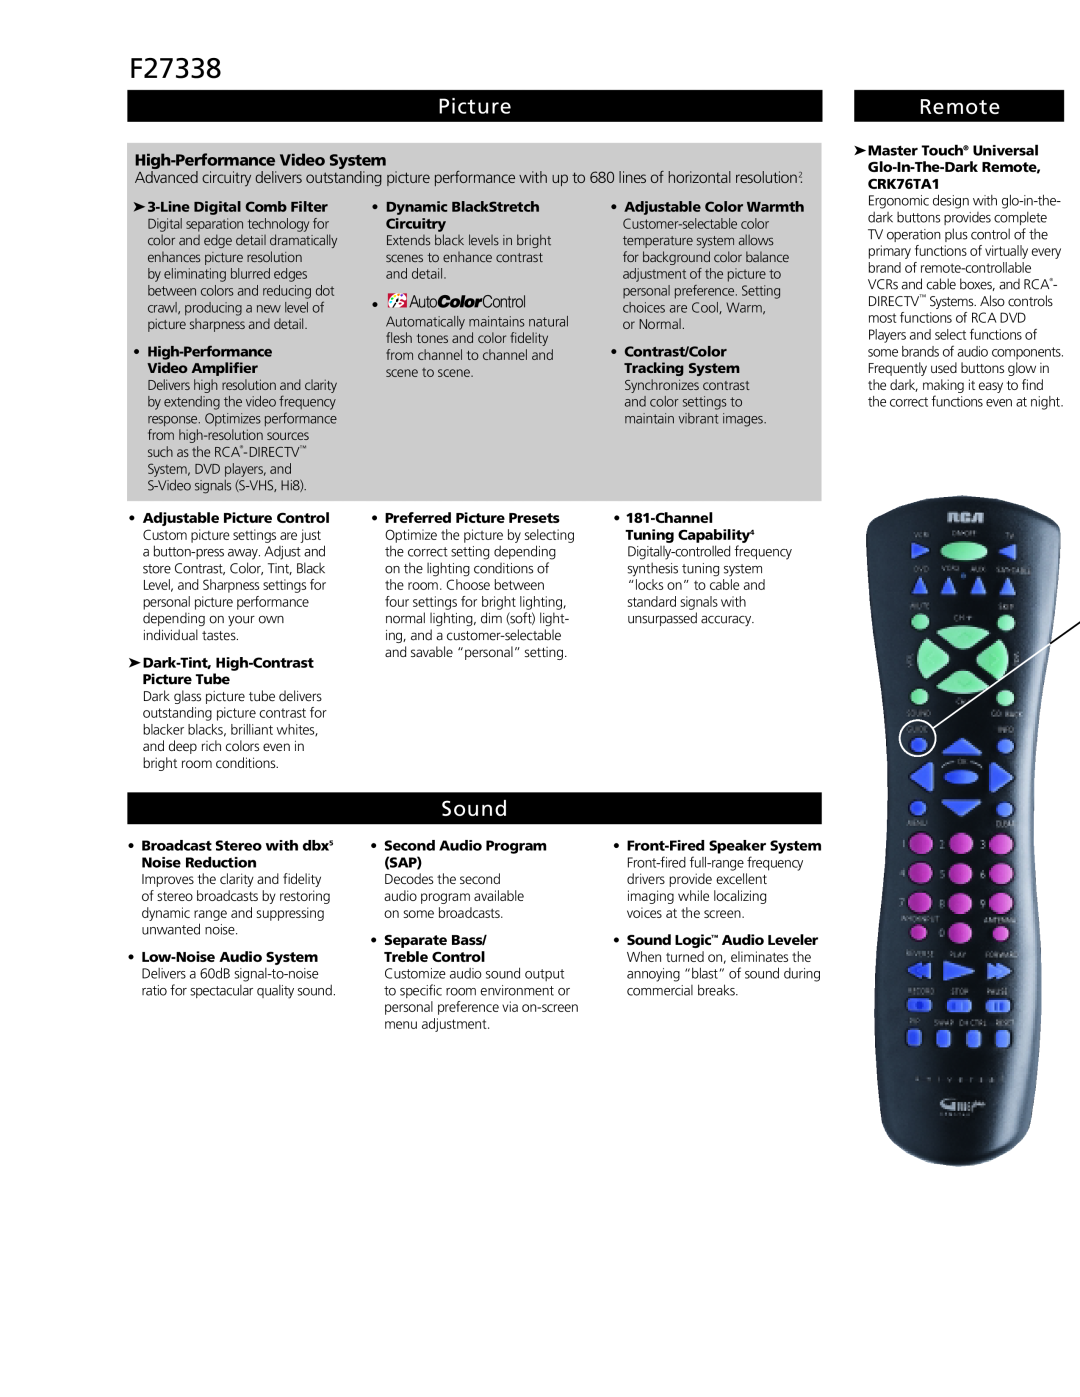 RCA F27338 manual Picture, Remote, Sound, High-Performance Video System 